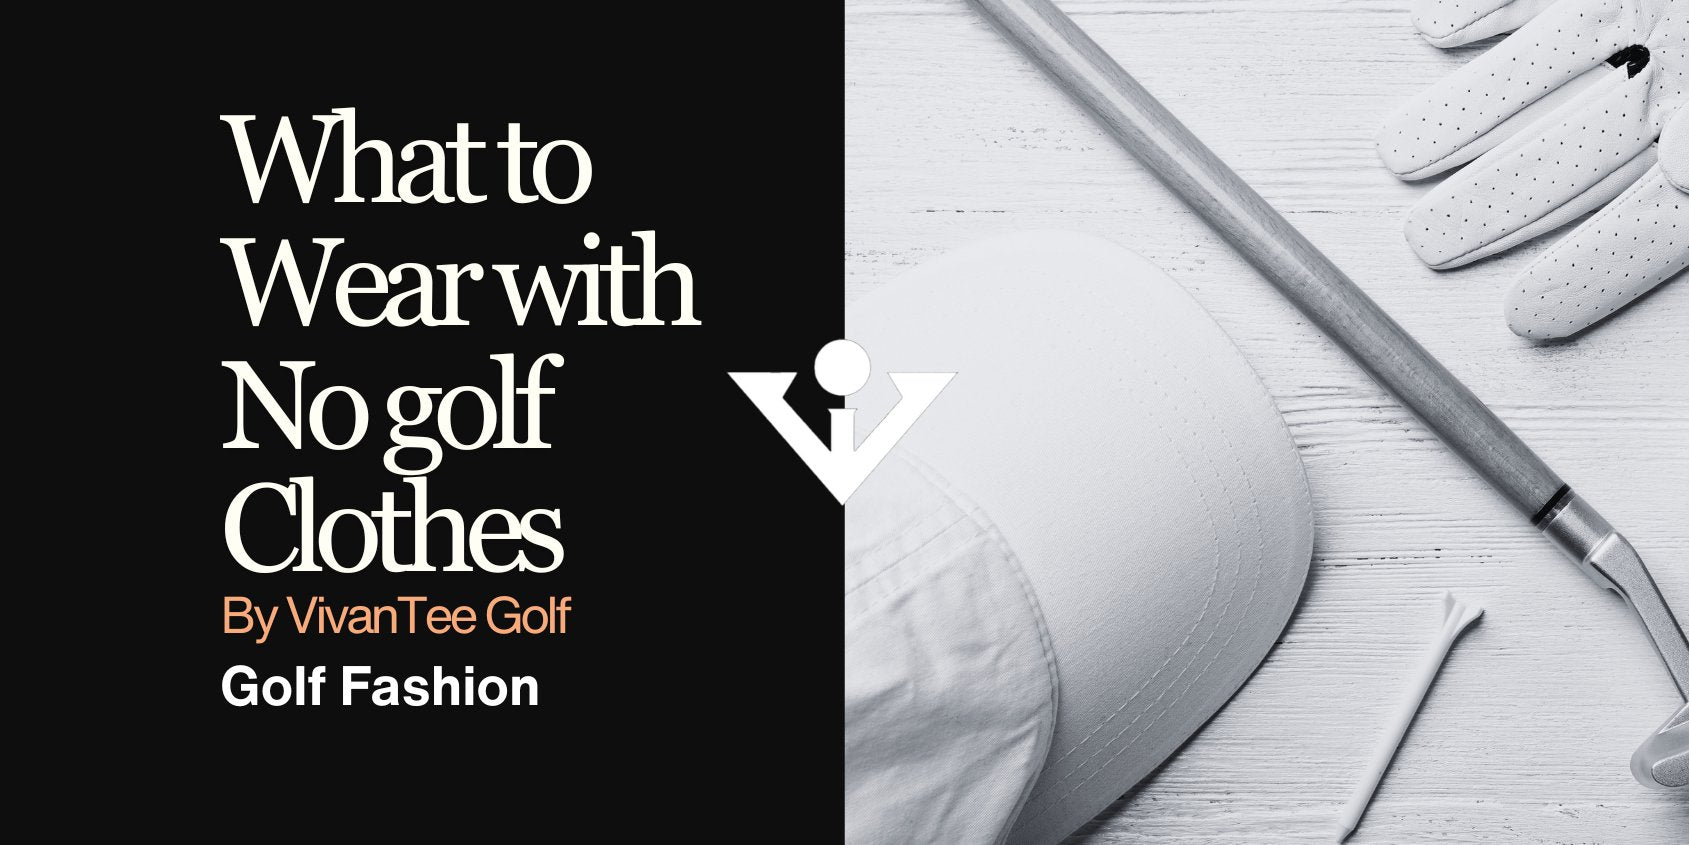 Dress to Impress: What to wear golfing if you don't have golf clothes